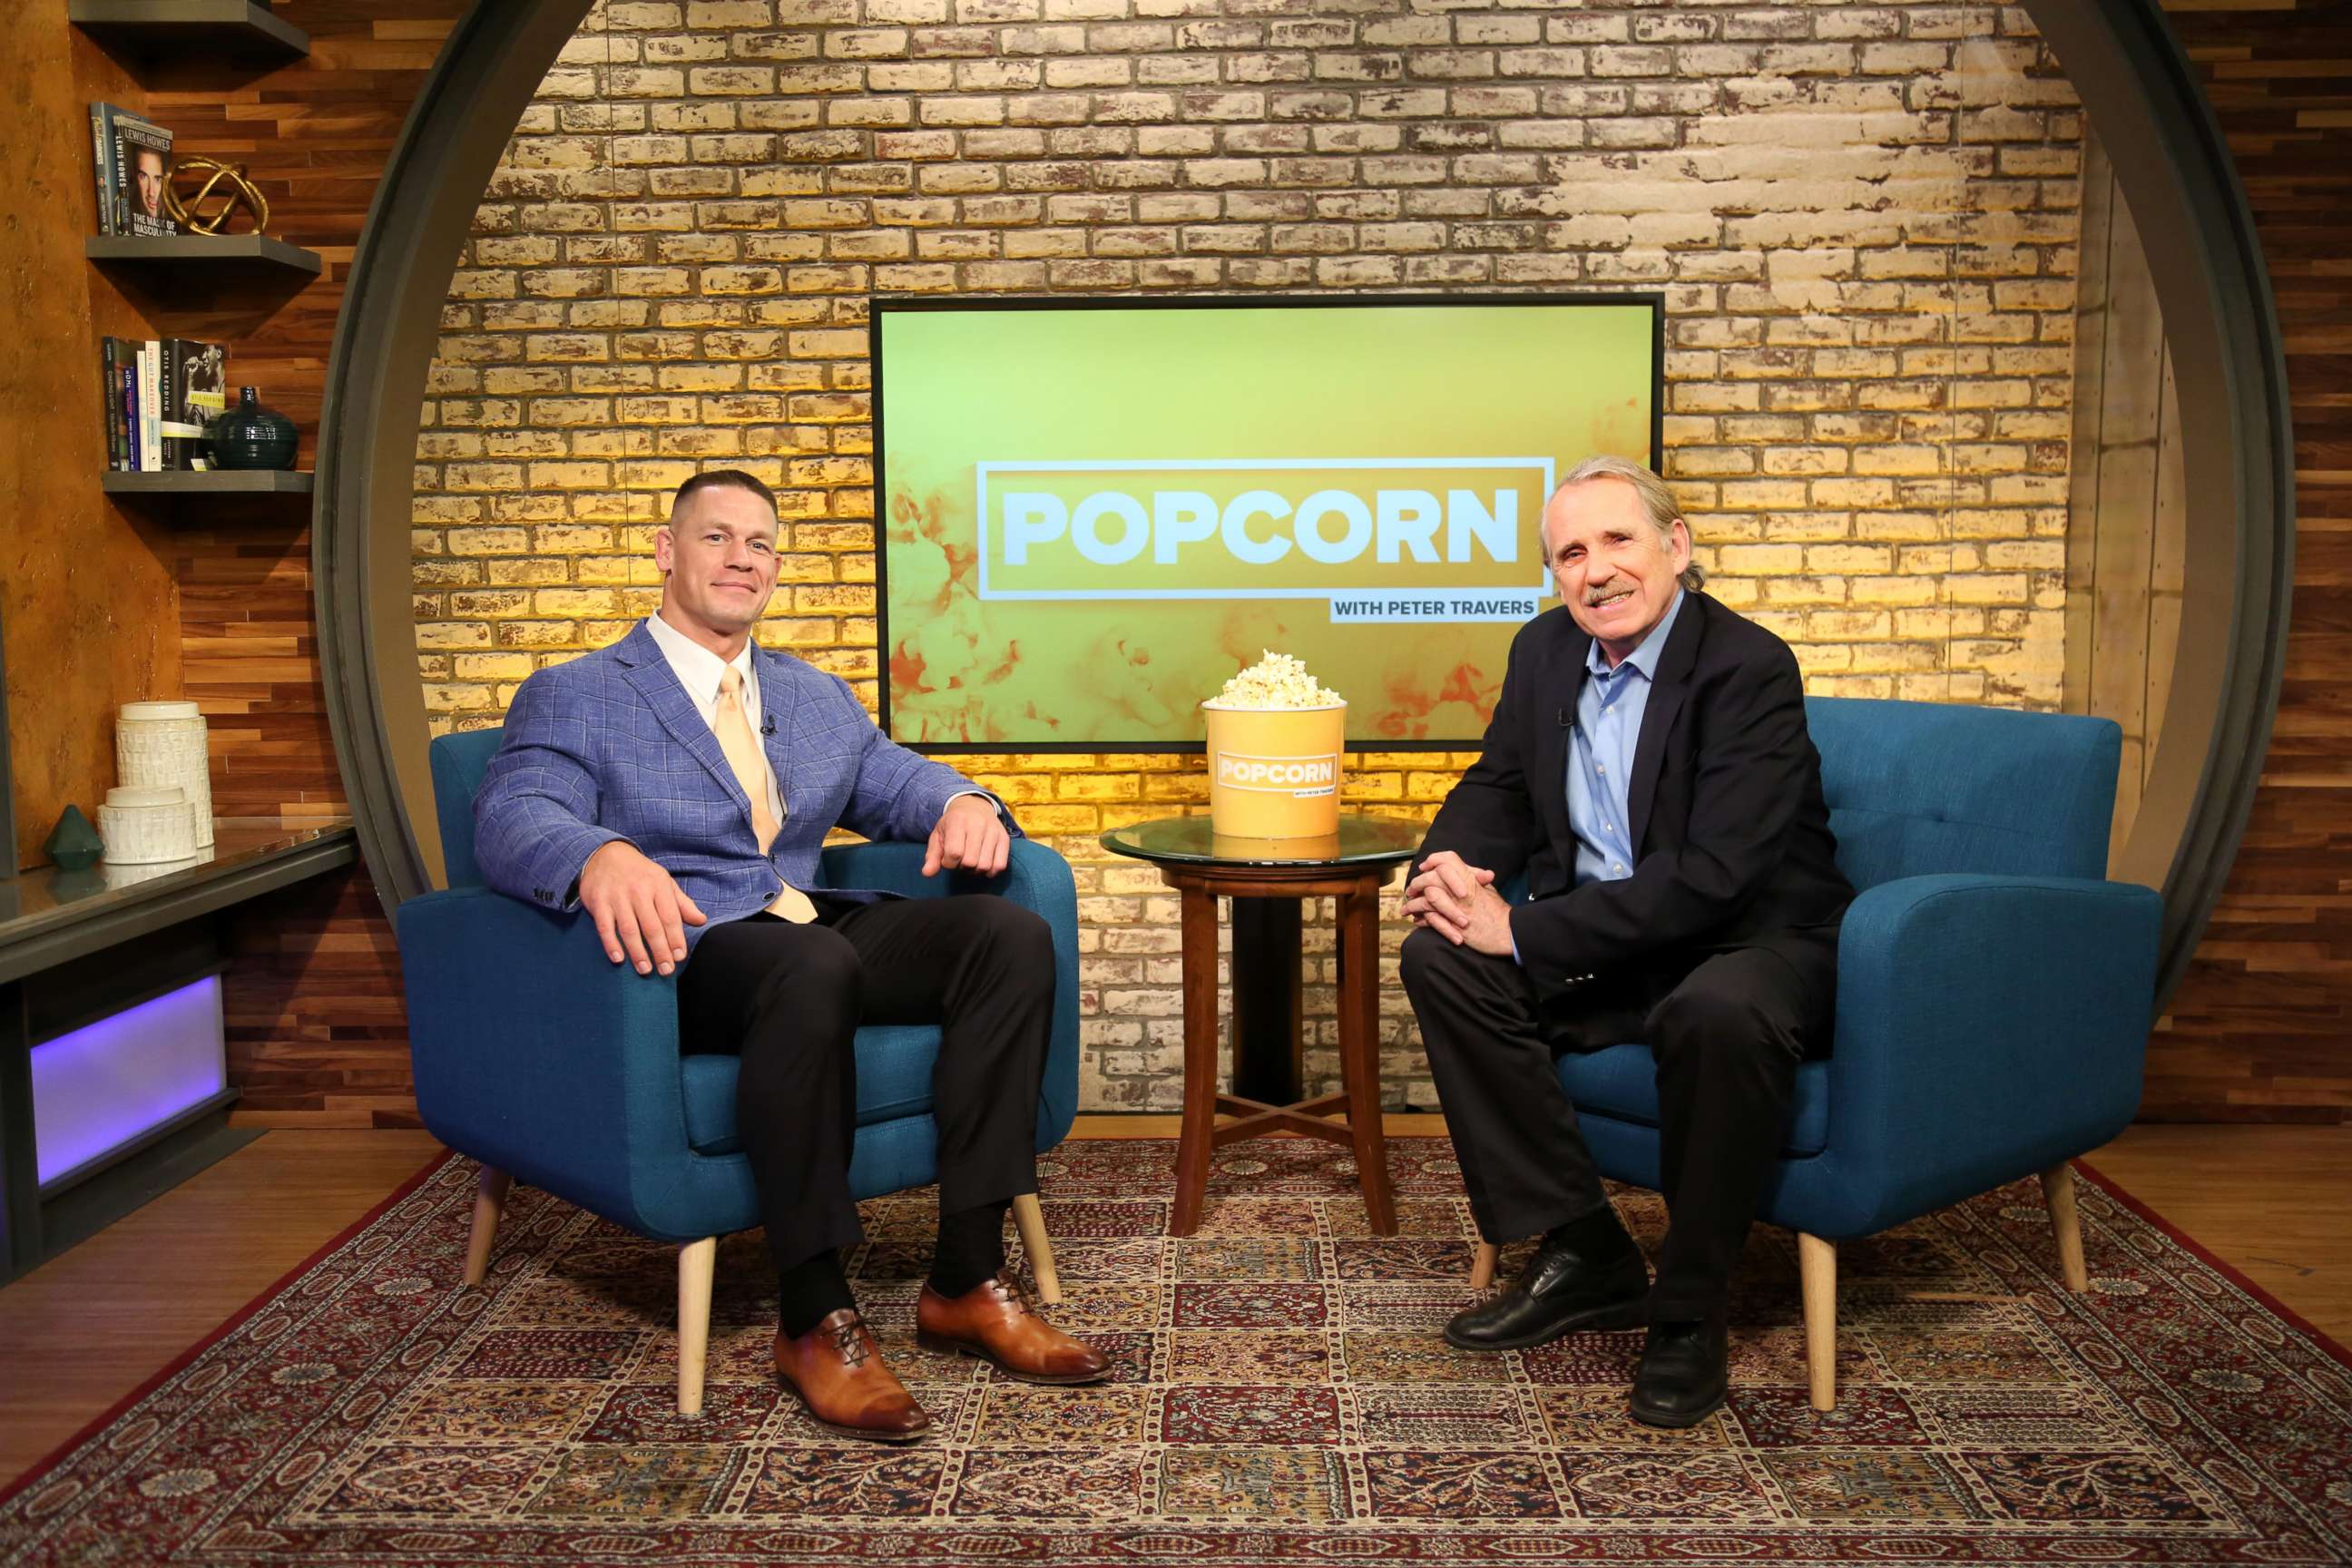 PHOTO: John Cena appears on "Popcorn with Peter Travers" at ABC News Studios in New York City, March 29, 2018.